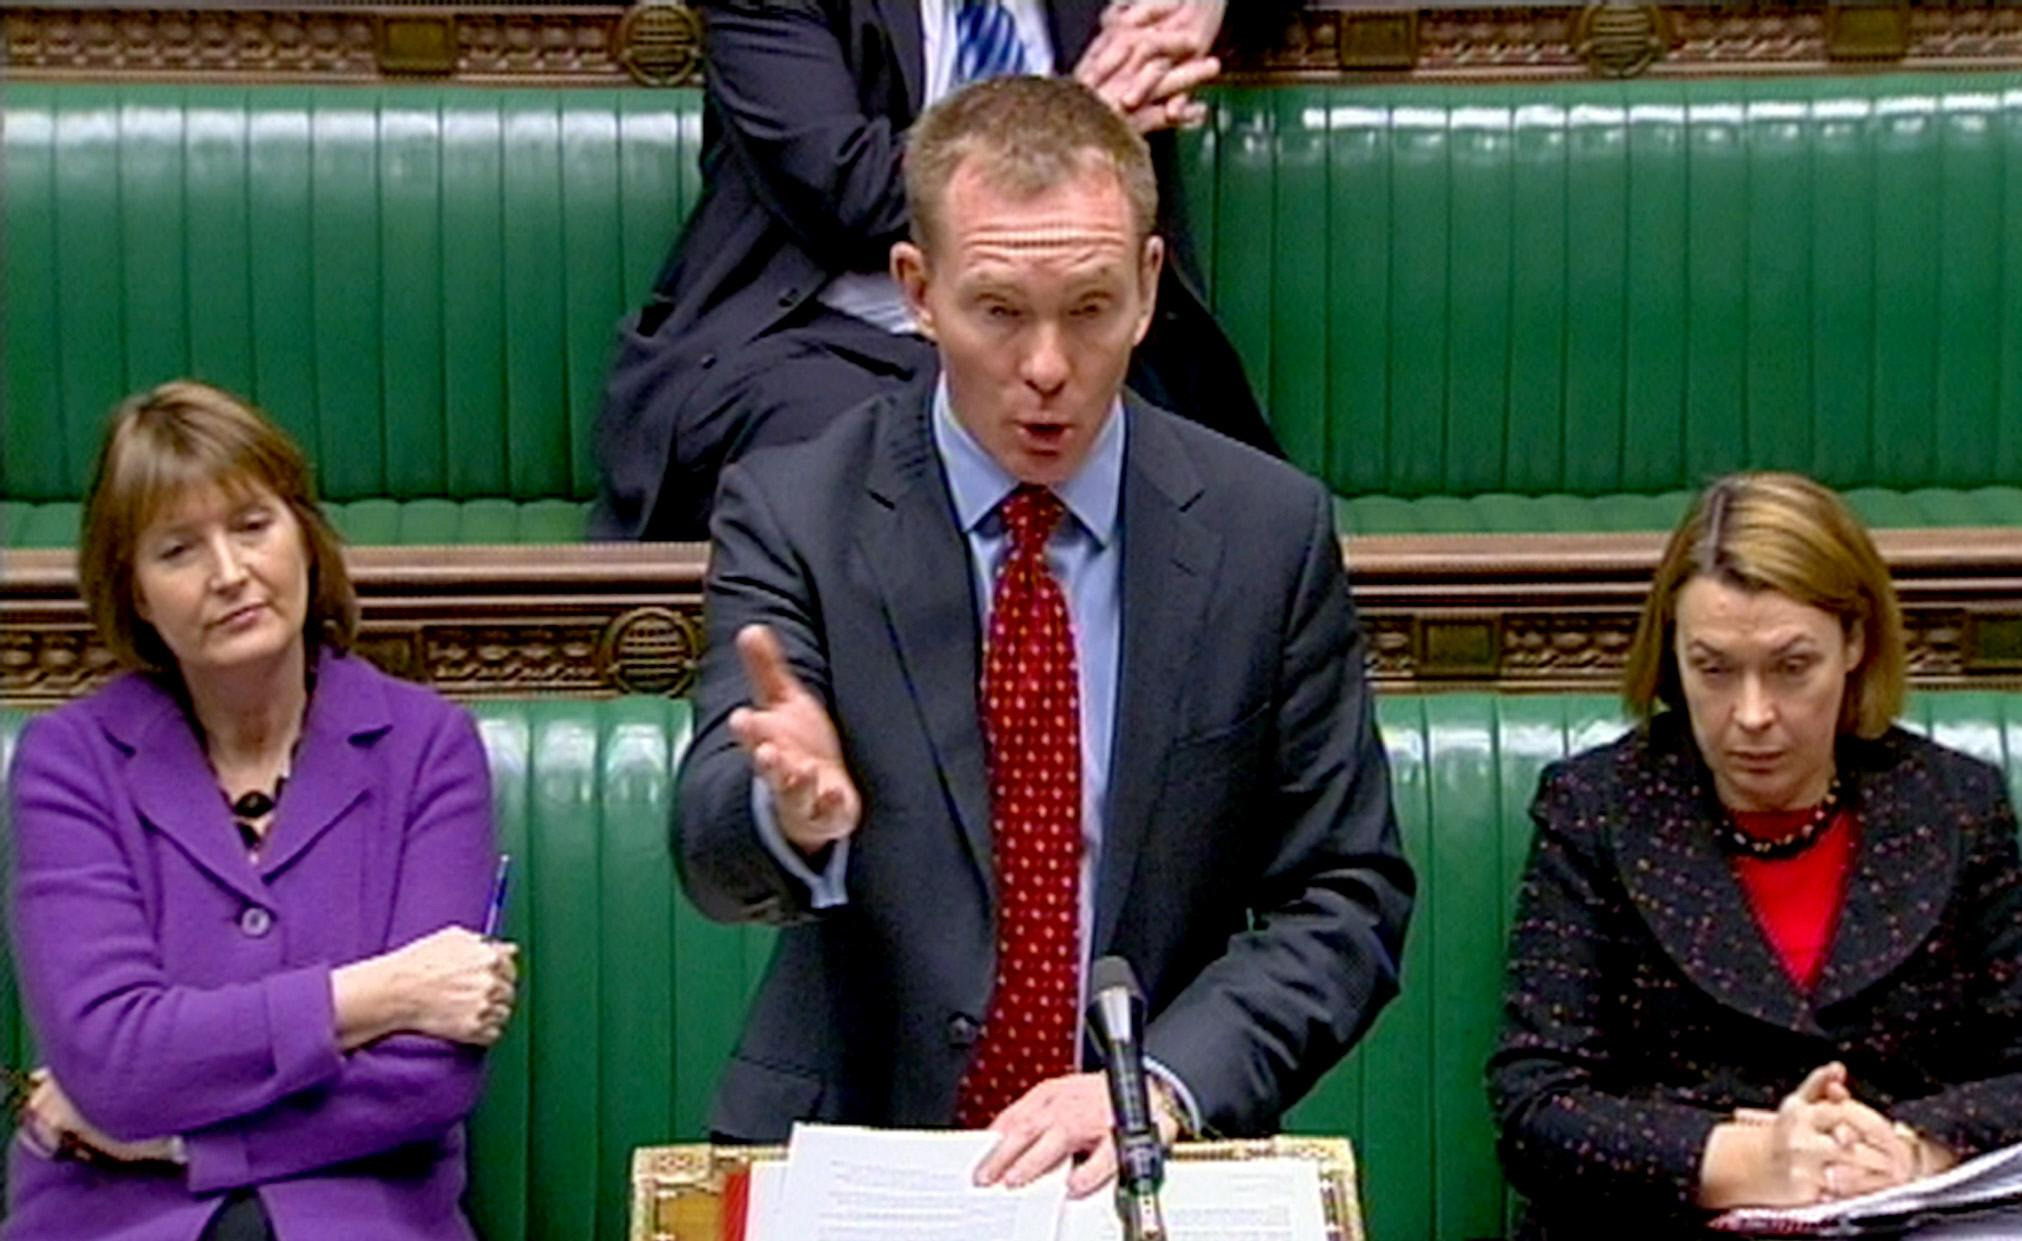 National Assembly 'shouldn't be given power of policing', says Labour MP  Chris Bryant - Wales Online